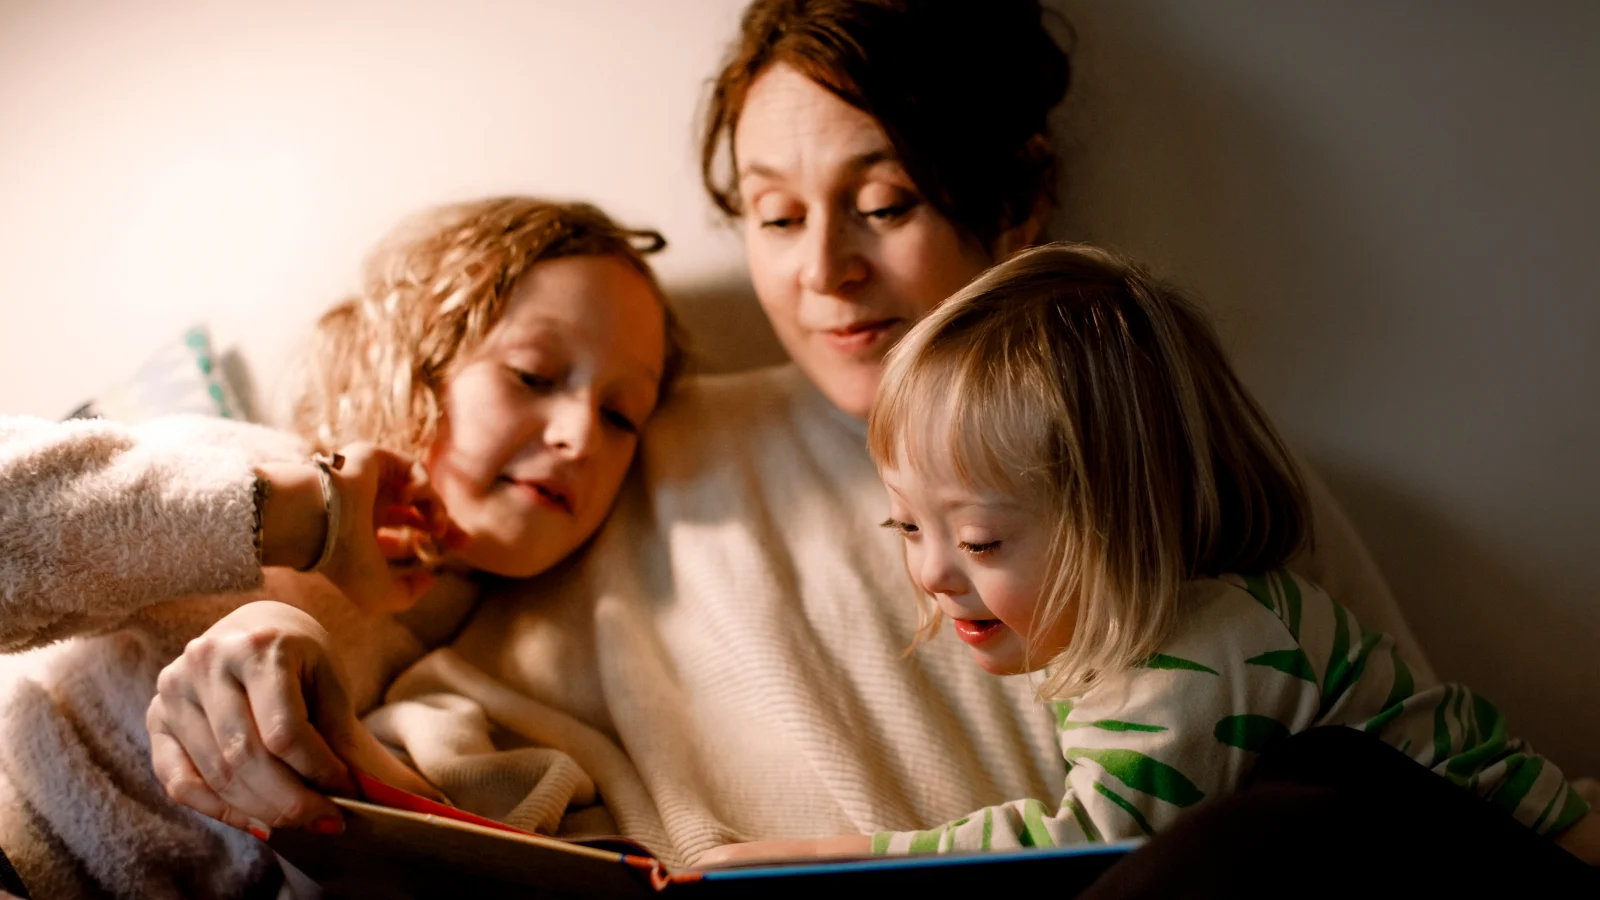 Girl with down syndrome reading a book with her mother and sister